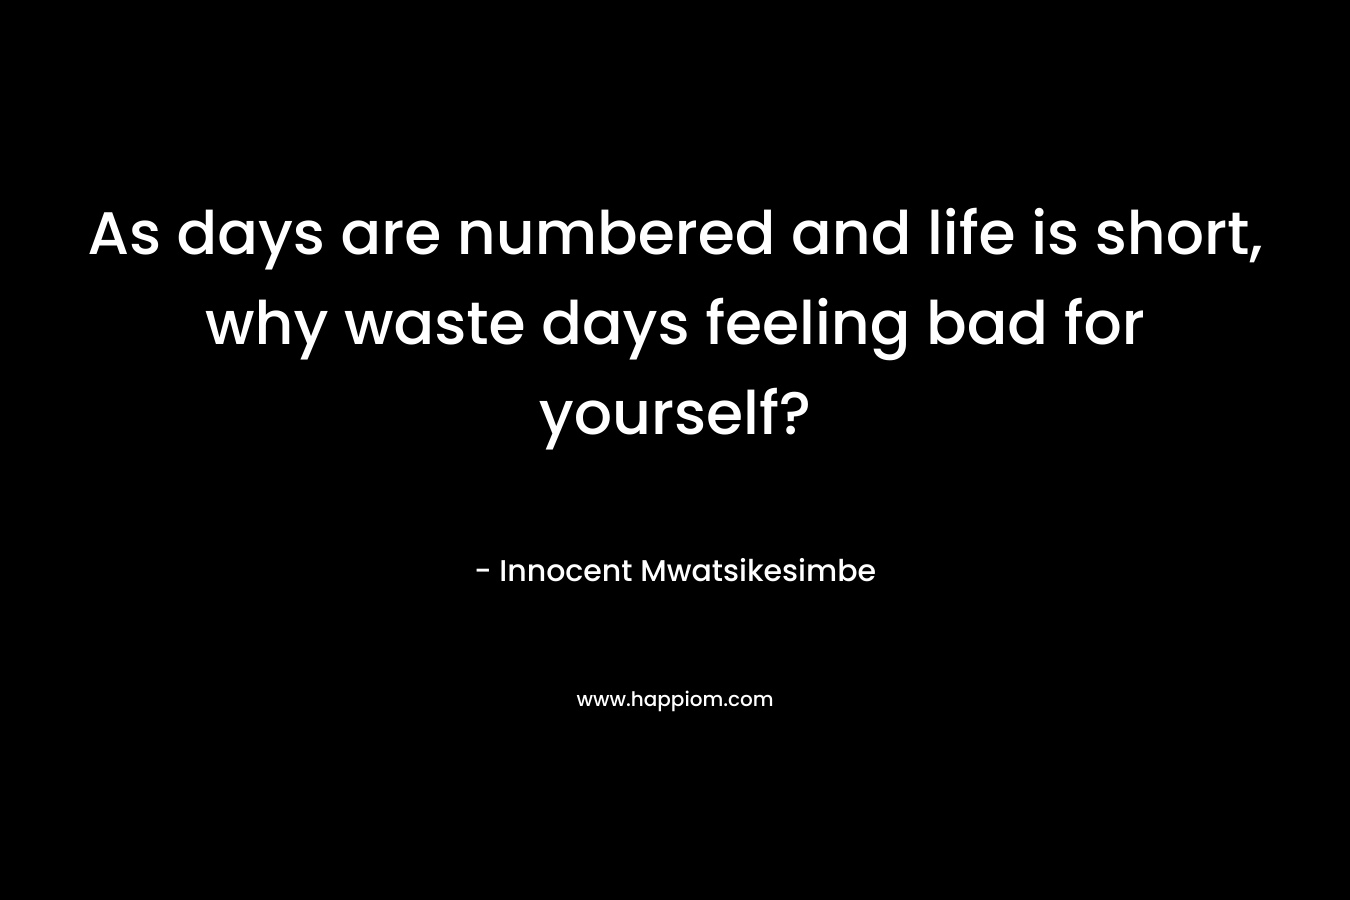 As days are numbered and life is short, why waste days feeling bad for yourself?